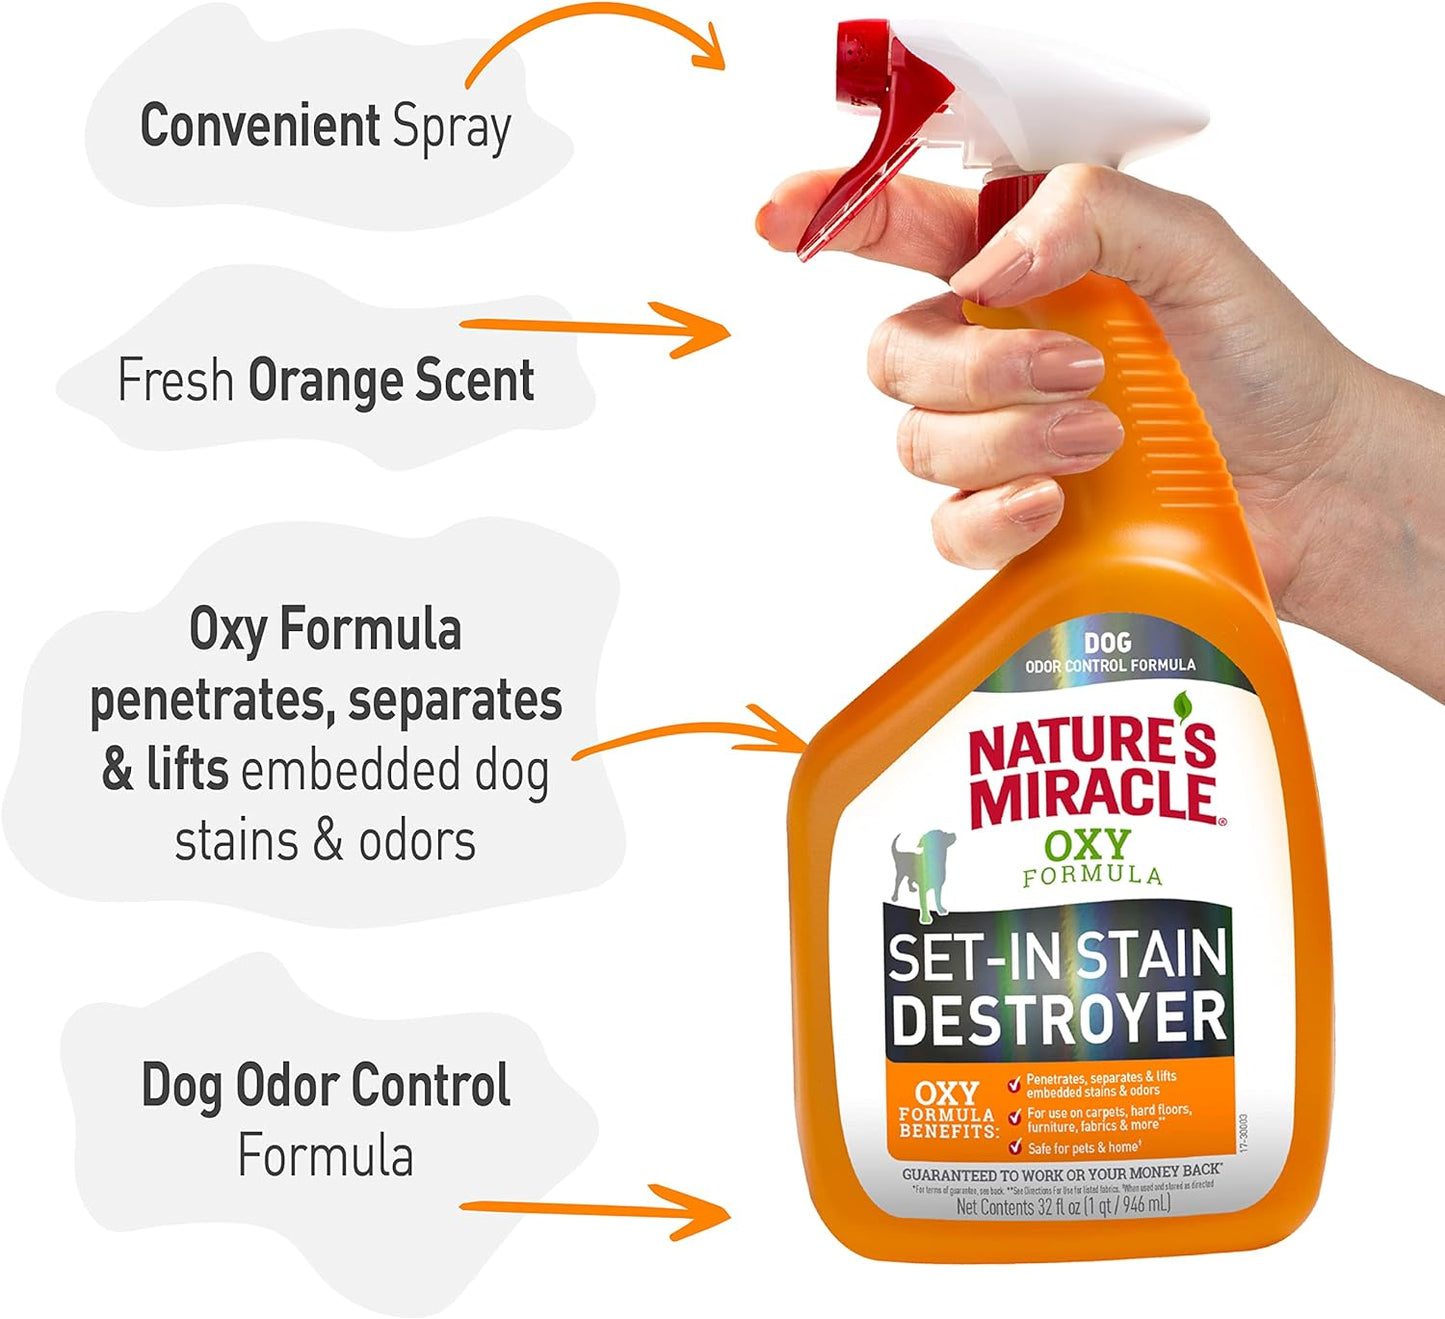 Nature's Miracle Oxy Formula Set-In-Stain Destroyer